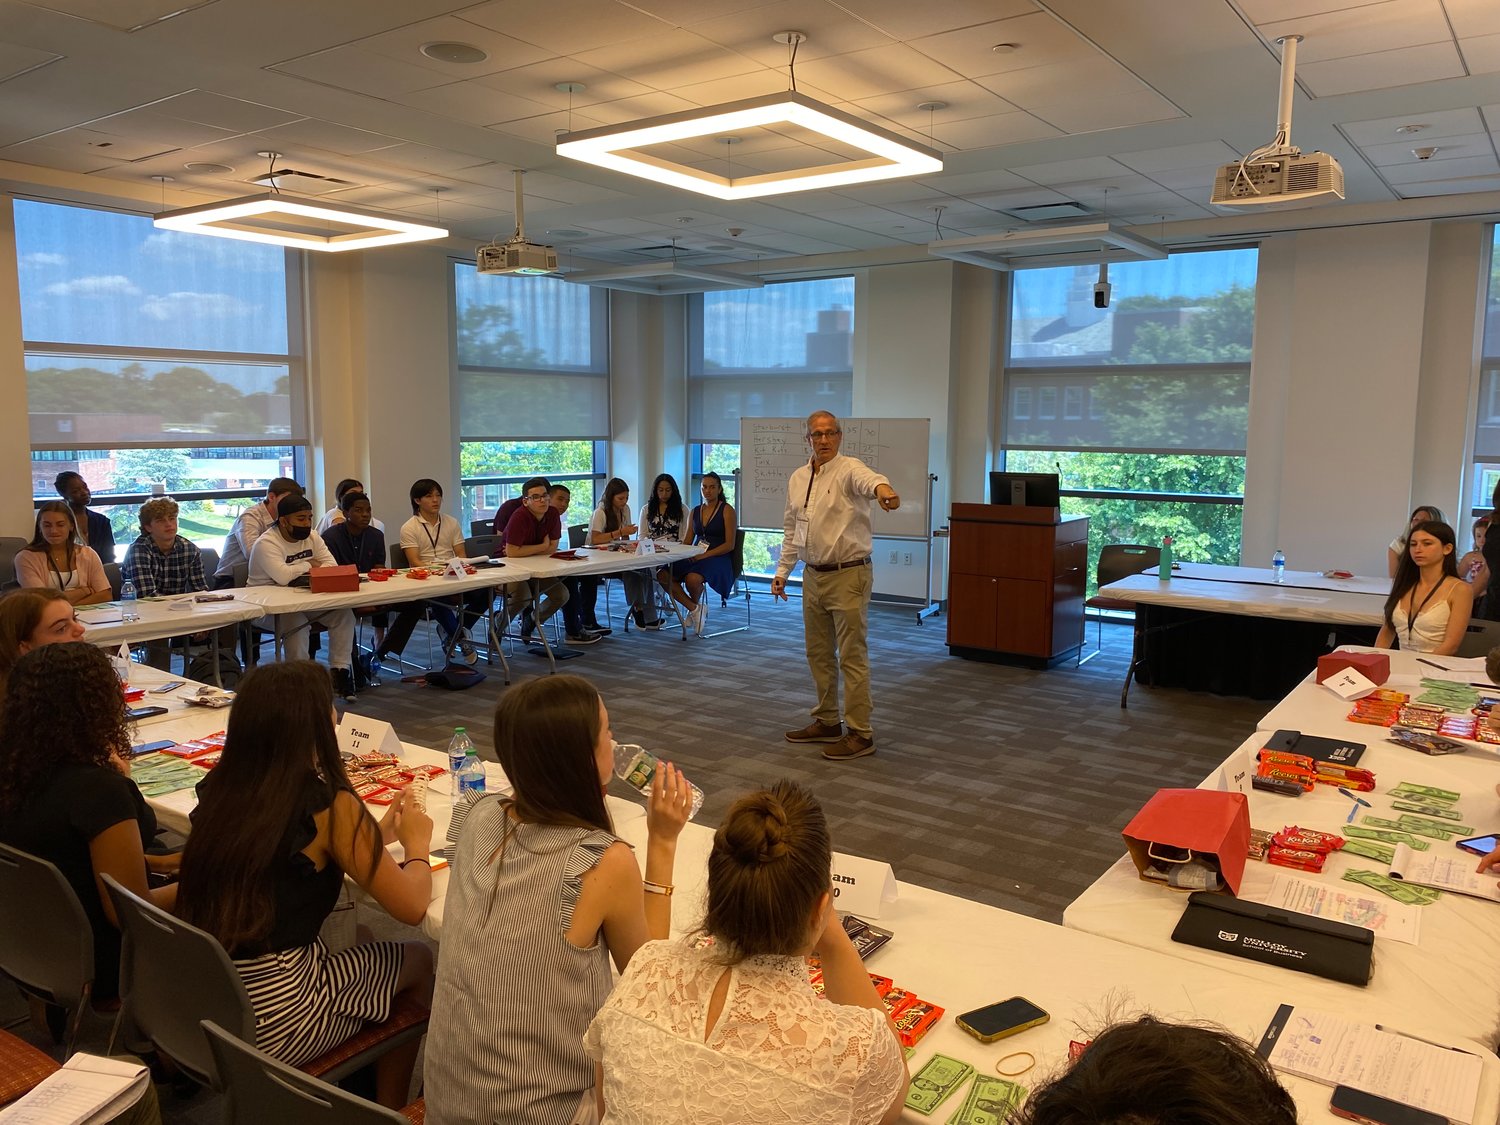 Molloy University professor Bruce Haller delivered news to keep the students in Molloy University's Business Boot Camp on their toes during a mock Wall Street trading exercise.